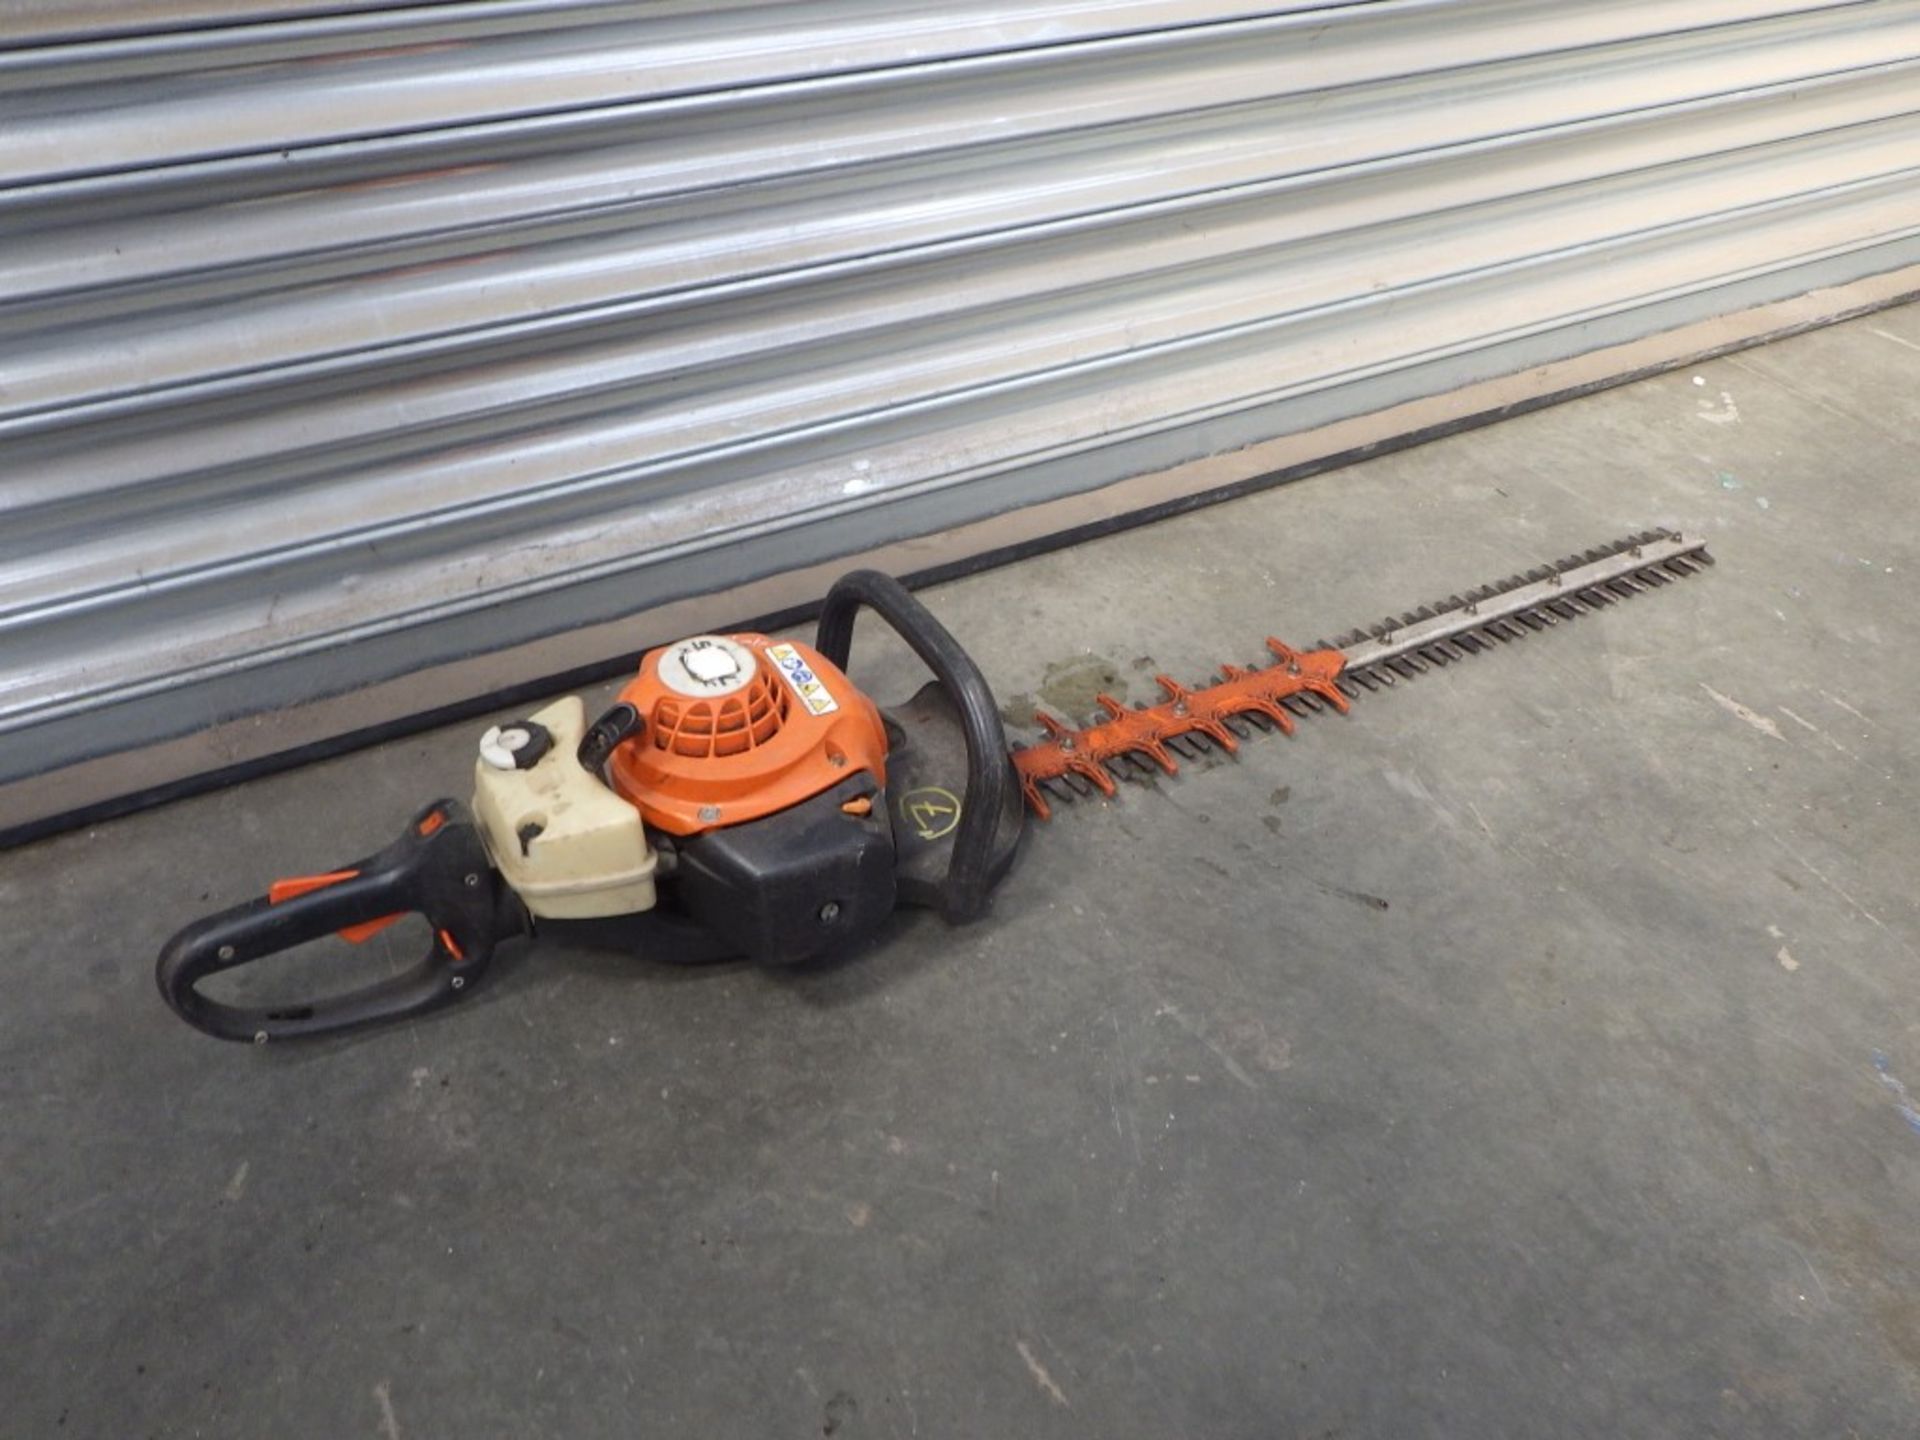 Stihl HS 82RC Petrol Hedge Trimmer - Image 3 of 5